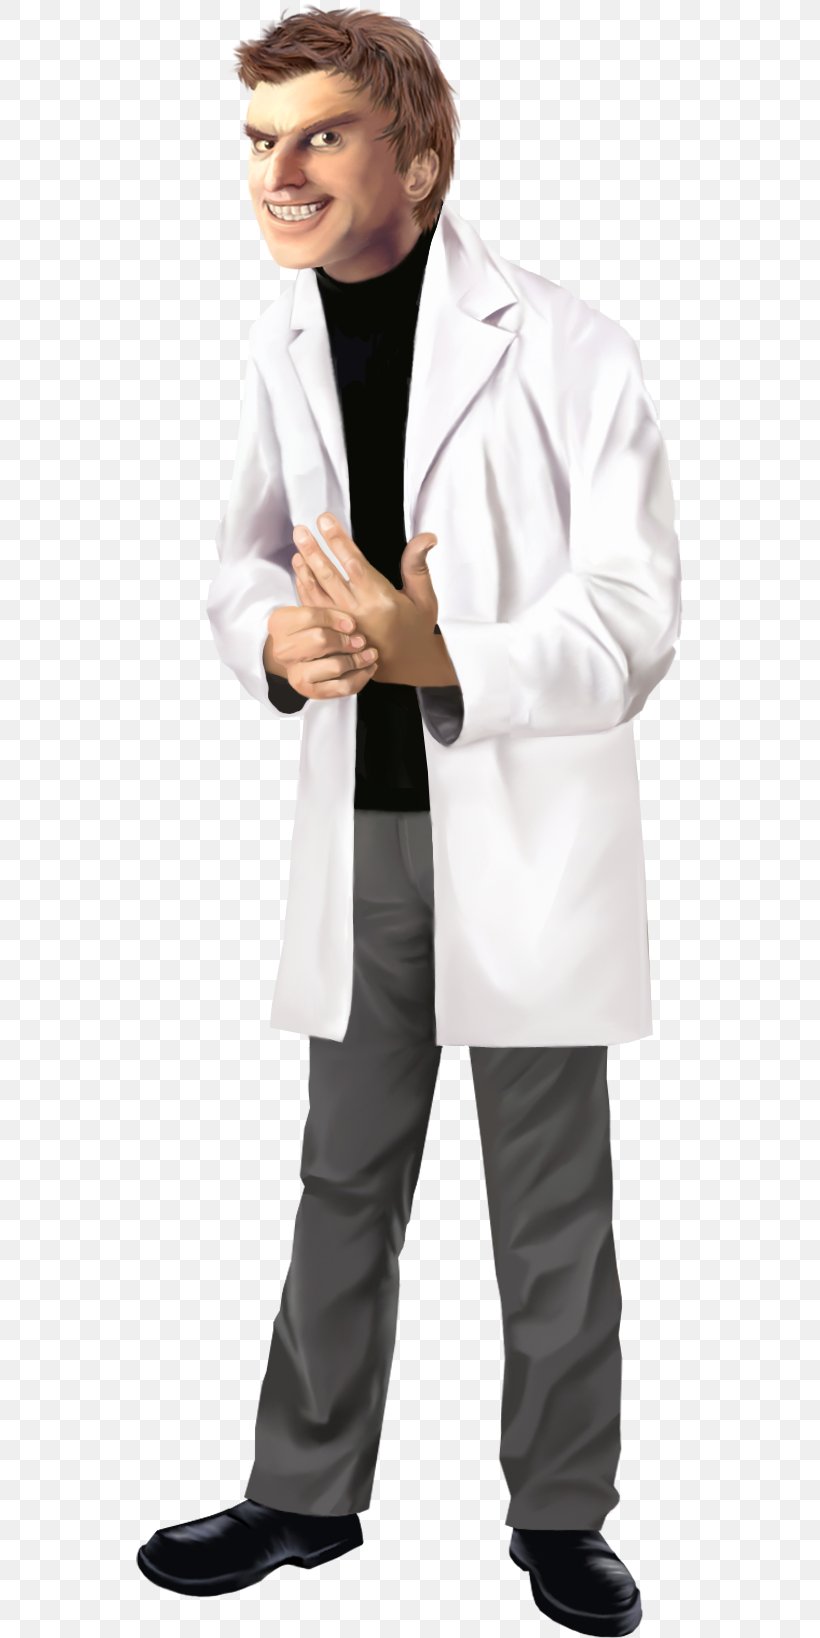 Dr. Heinz Doofenshmirtz Phineas And Ferb Phineas Flynn Ferb Fletcher Perry The Platypus, PNG, 547x1638px, Dr Heinz Doofenshmirtz, Art, Businessperson, Character, Costume Download Free